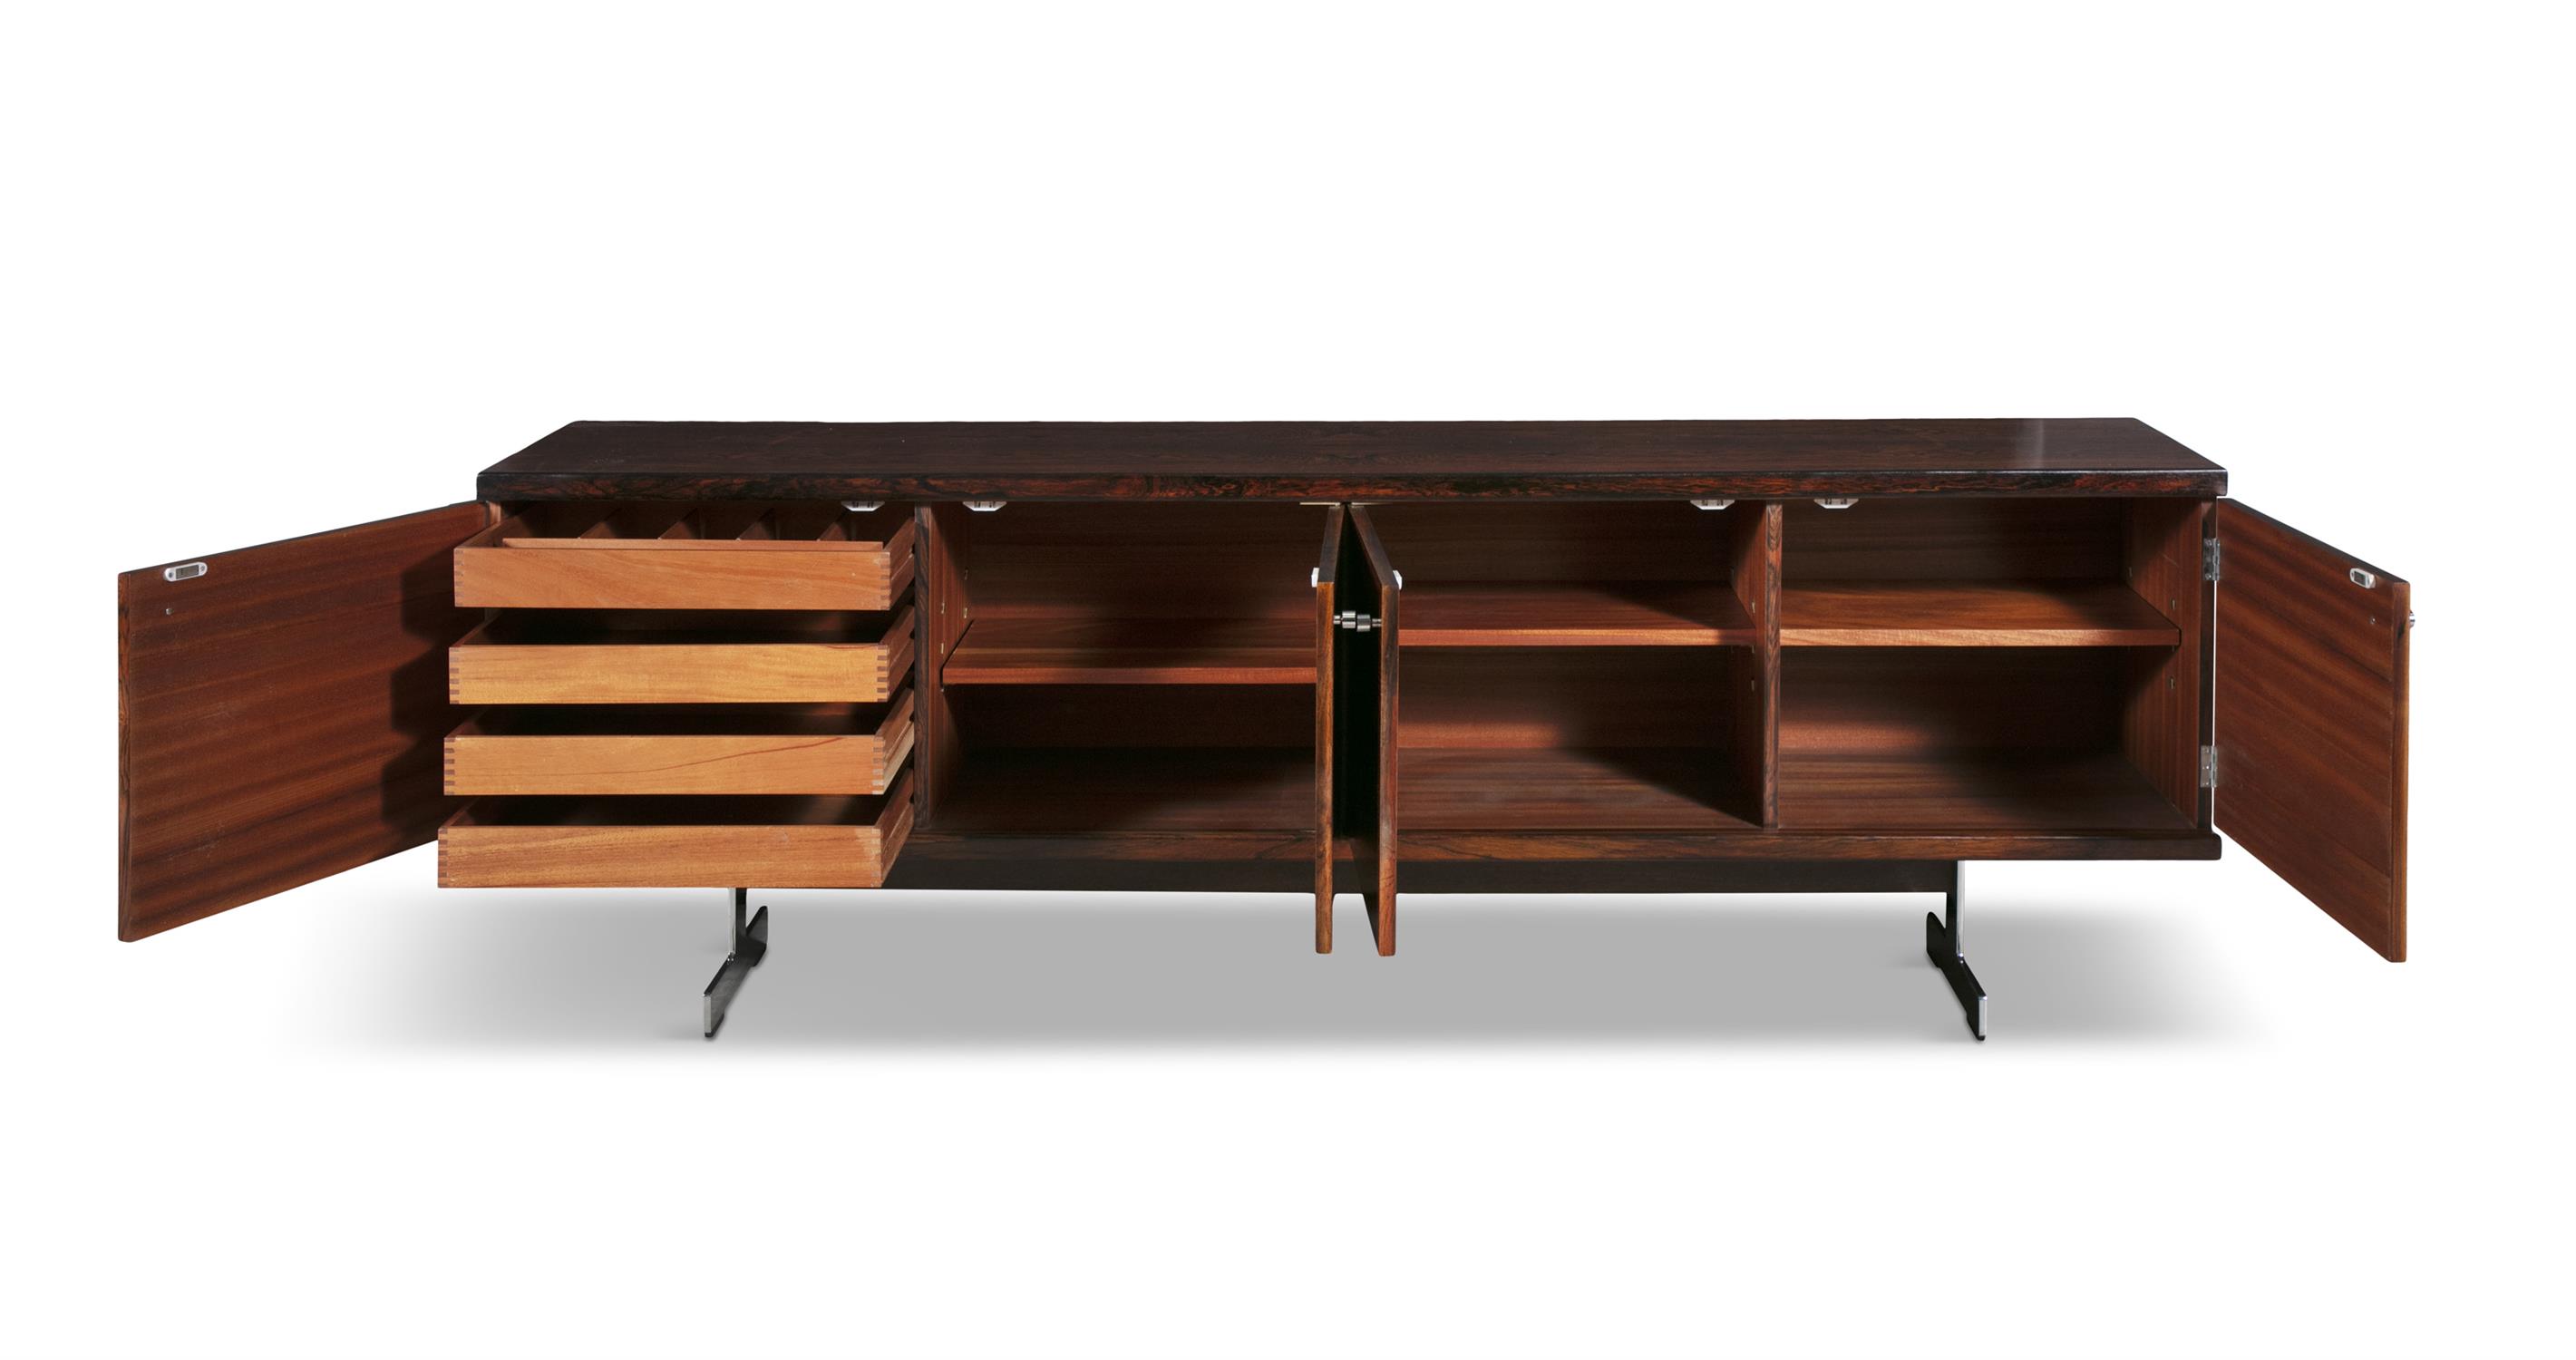 ROBIN DAY (1913 - 2000) A rosewood sideboard by Robin Day. UK, c.1960. 214 x 46 x 72.5cm(h) - Image 3 of 5